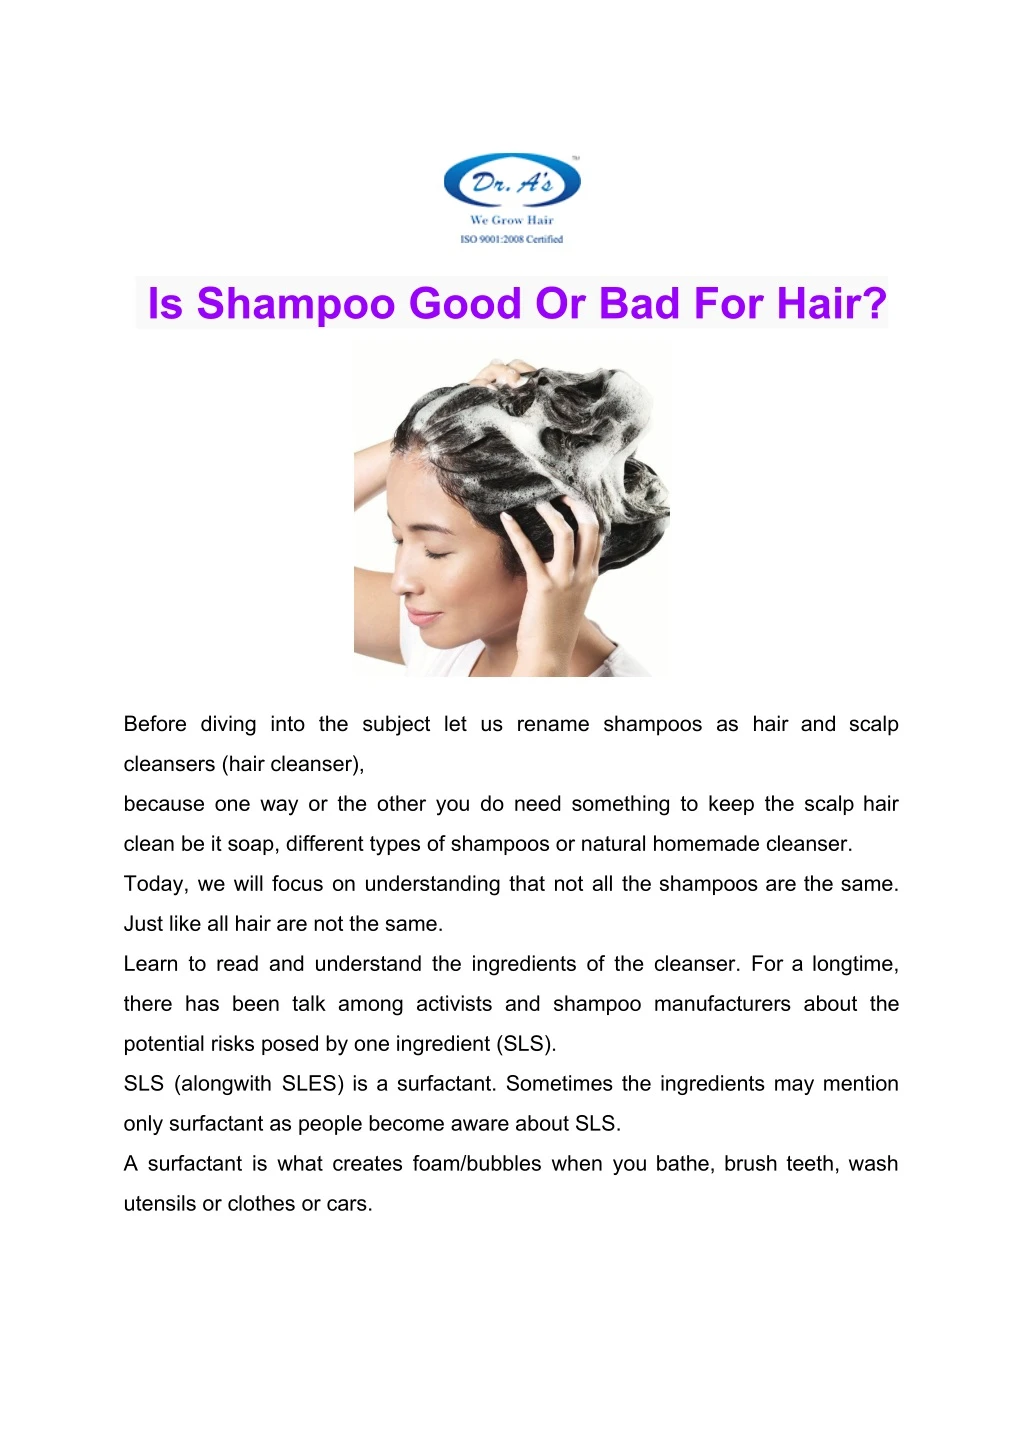 is shampoo good or bad for hair